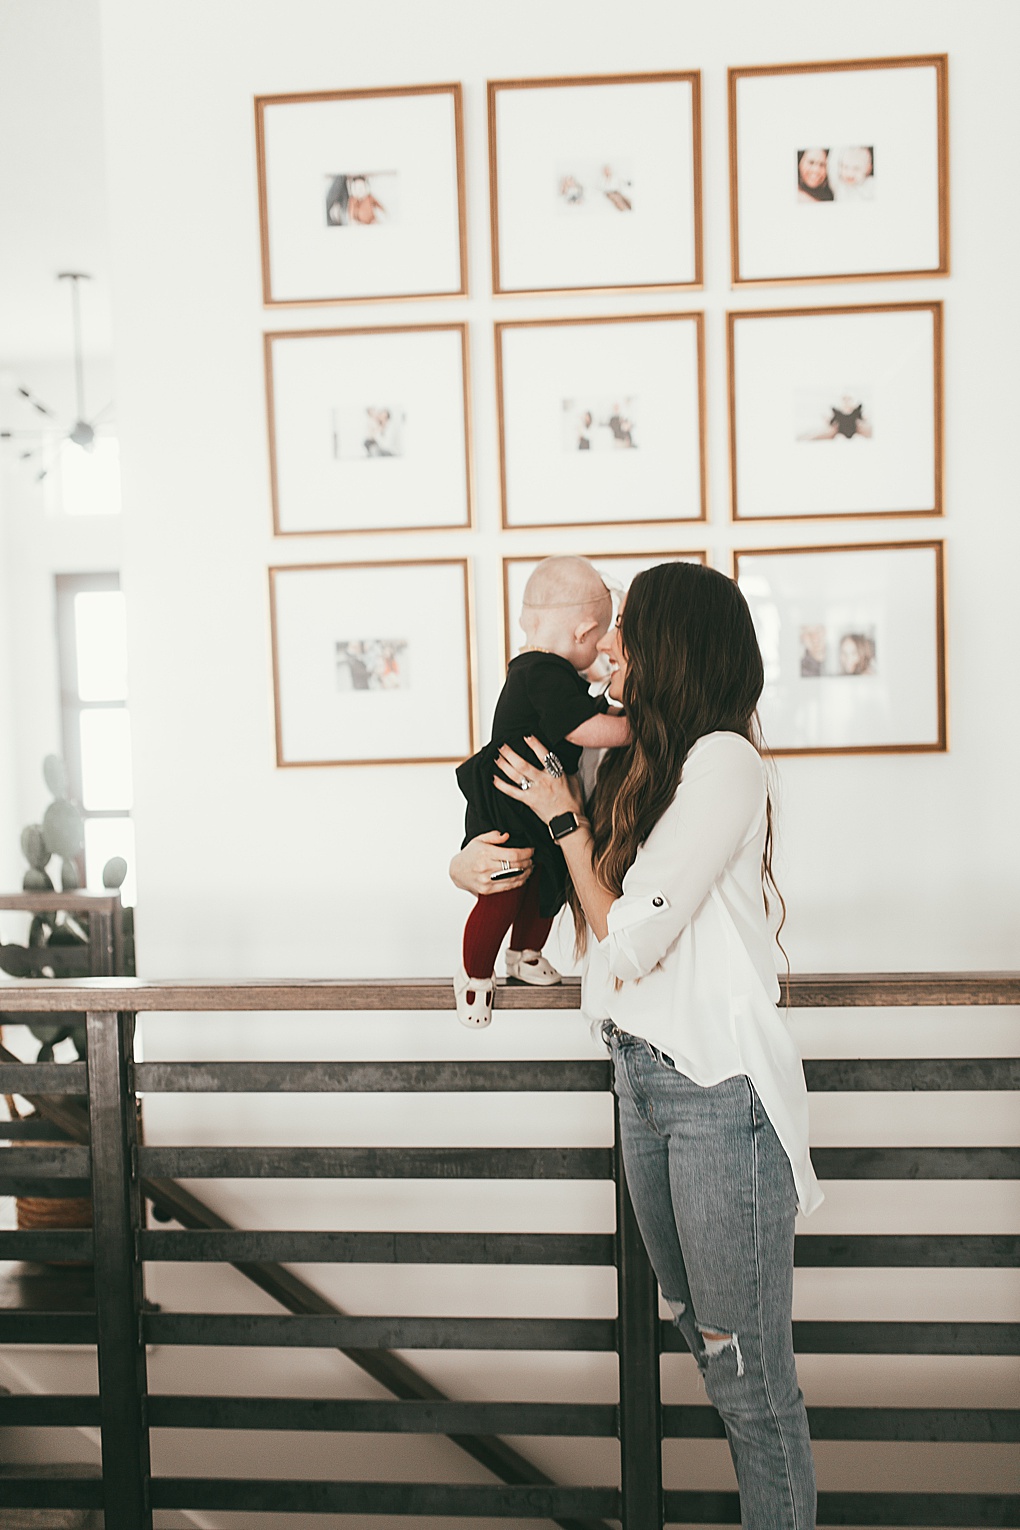 Curious how to make your house a home? Utah Style Blogger Dani Marie is sharing her favorite tips to make your house a home HERE!